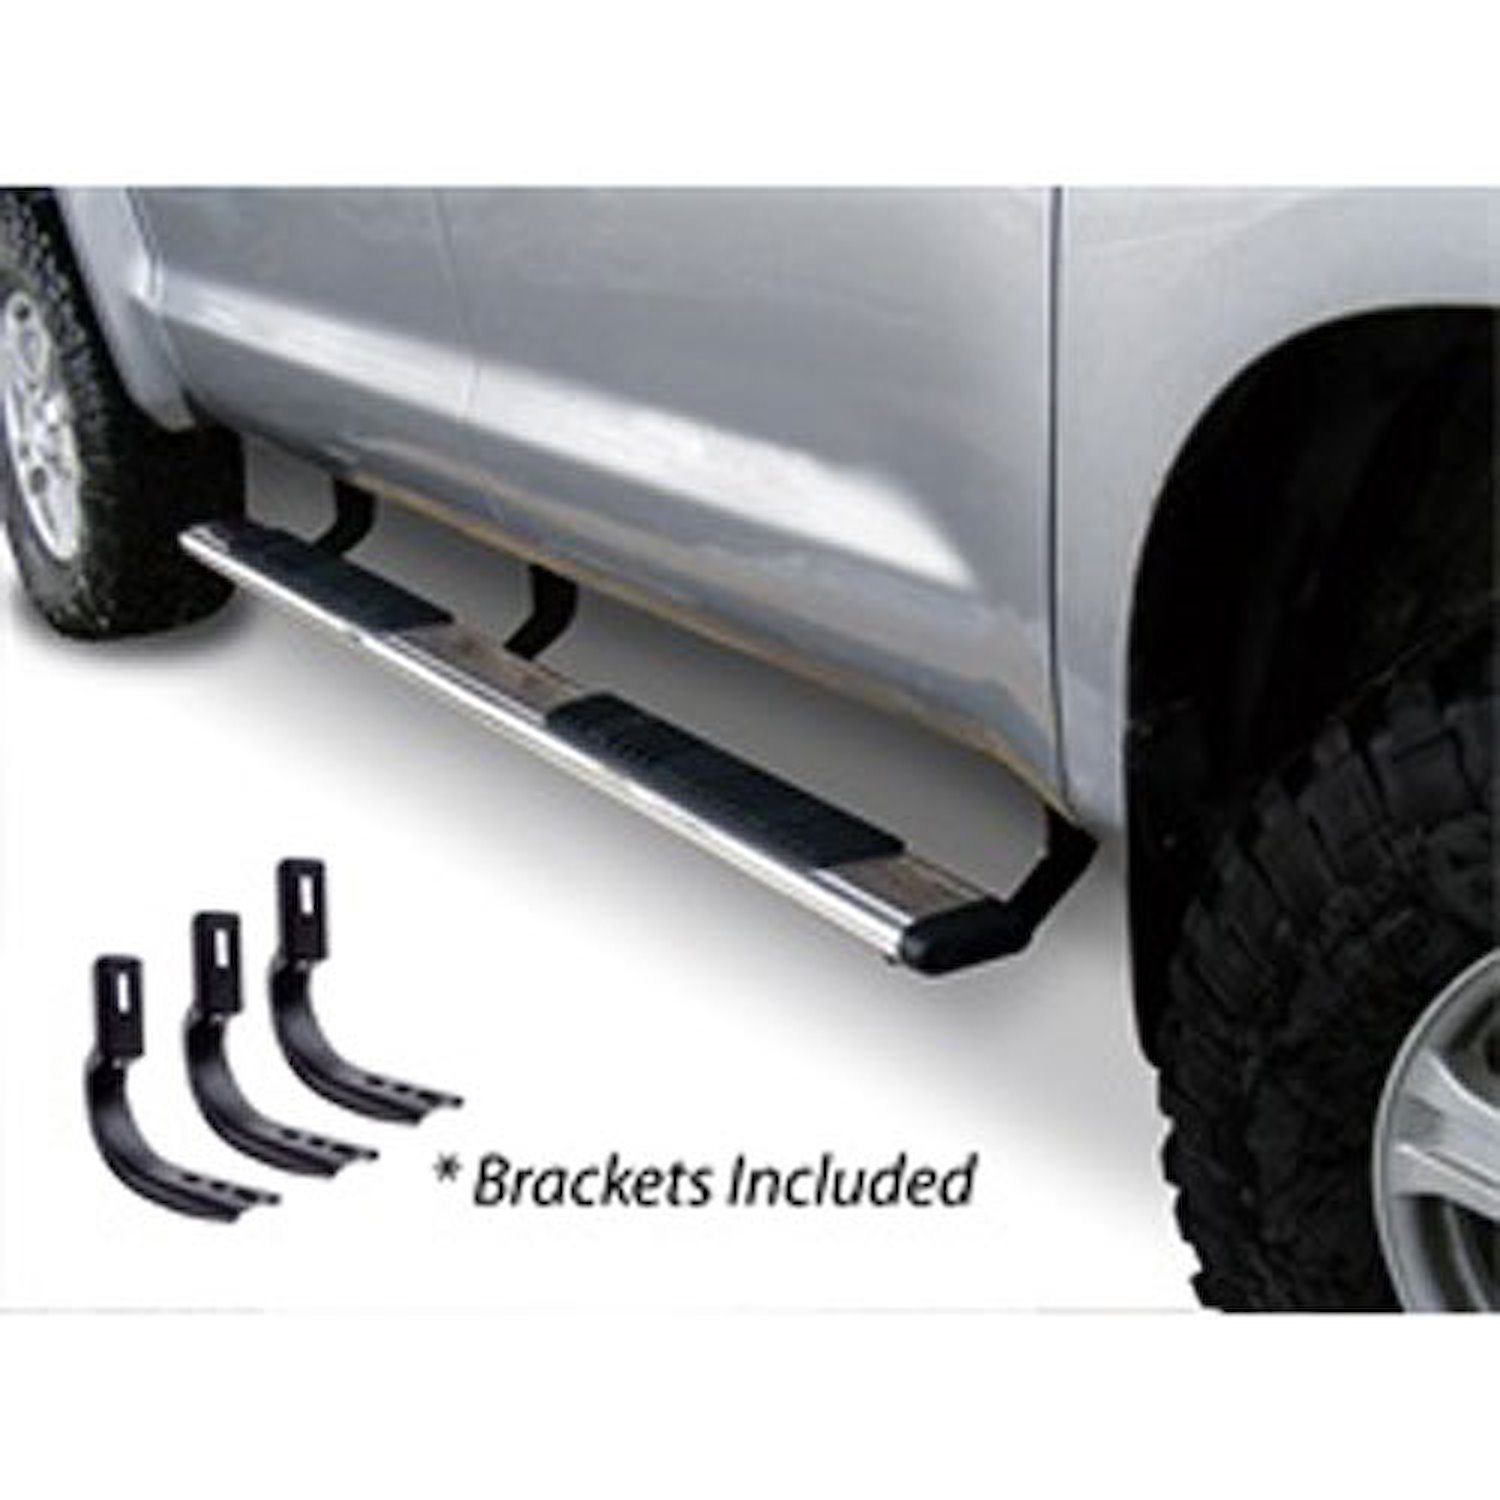 5" OE Xtreme Low Profile SideSteps Kit 2004-14-Ford F-150